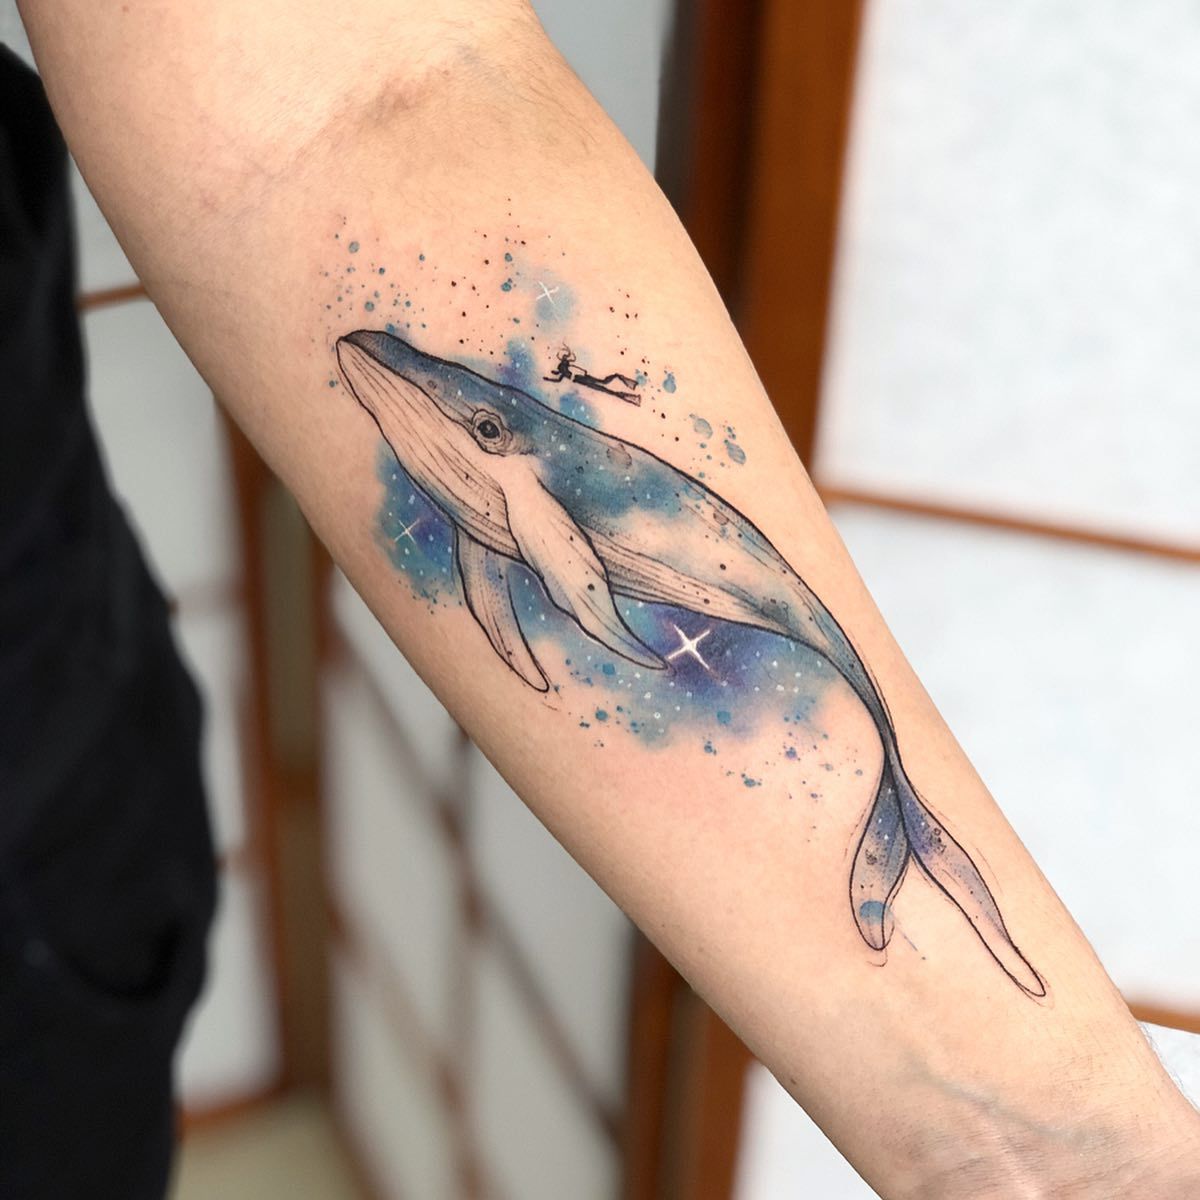 Whale Tattoo Meaning: Exploring the Rich Meanings Infused into Body Ink